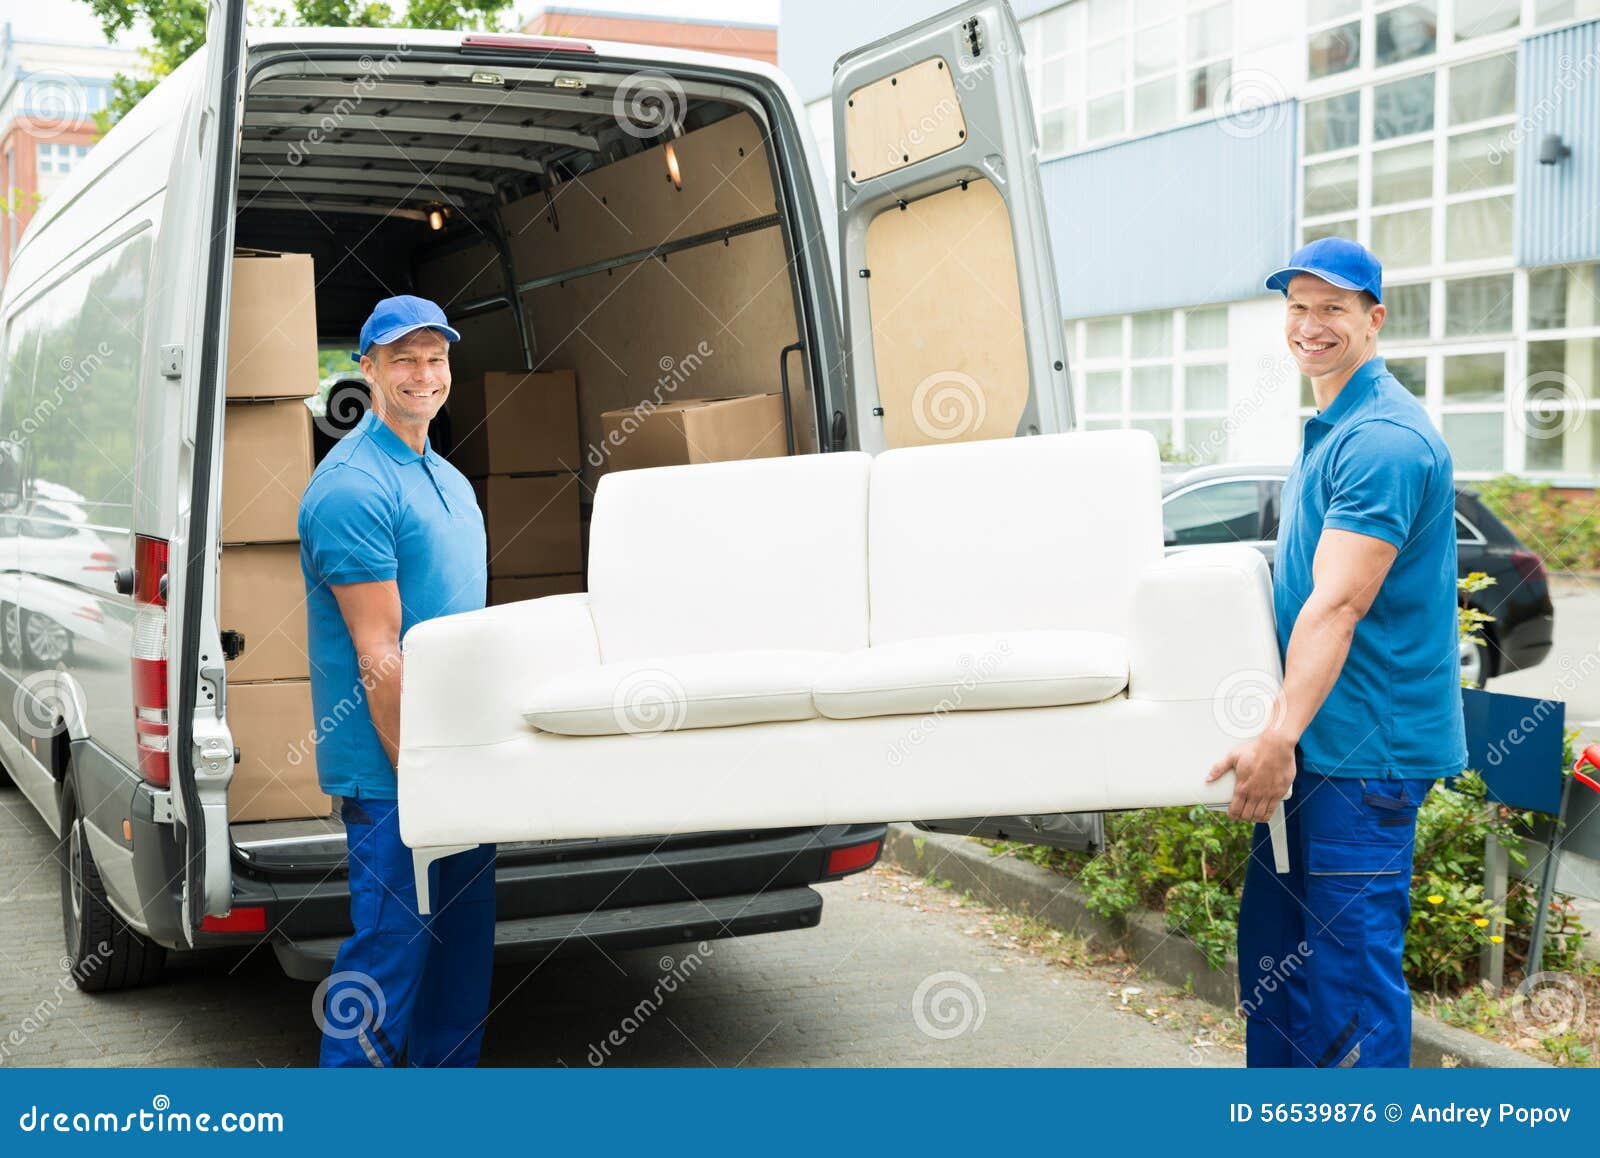 workers putting furniture and boxes in truck